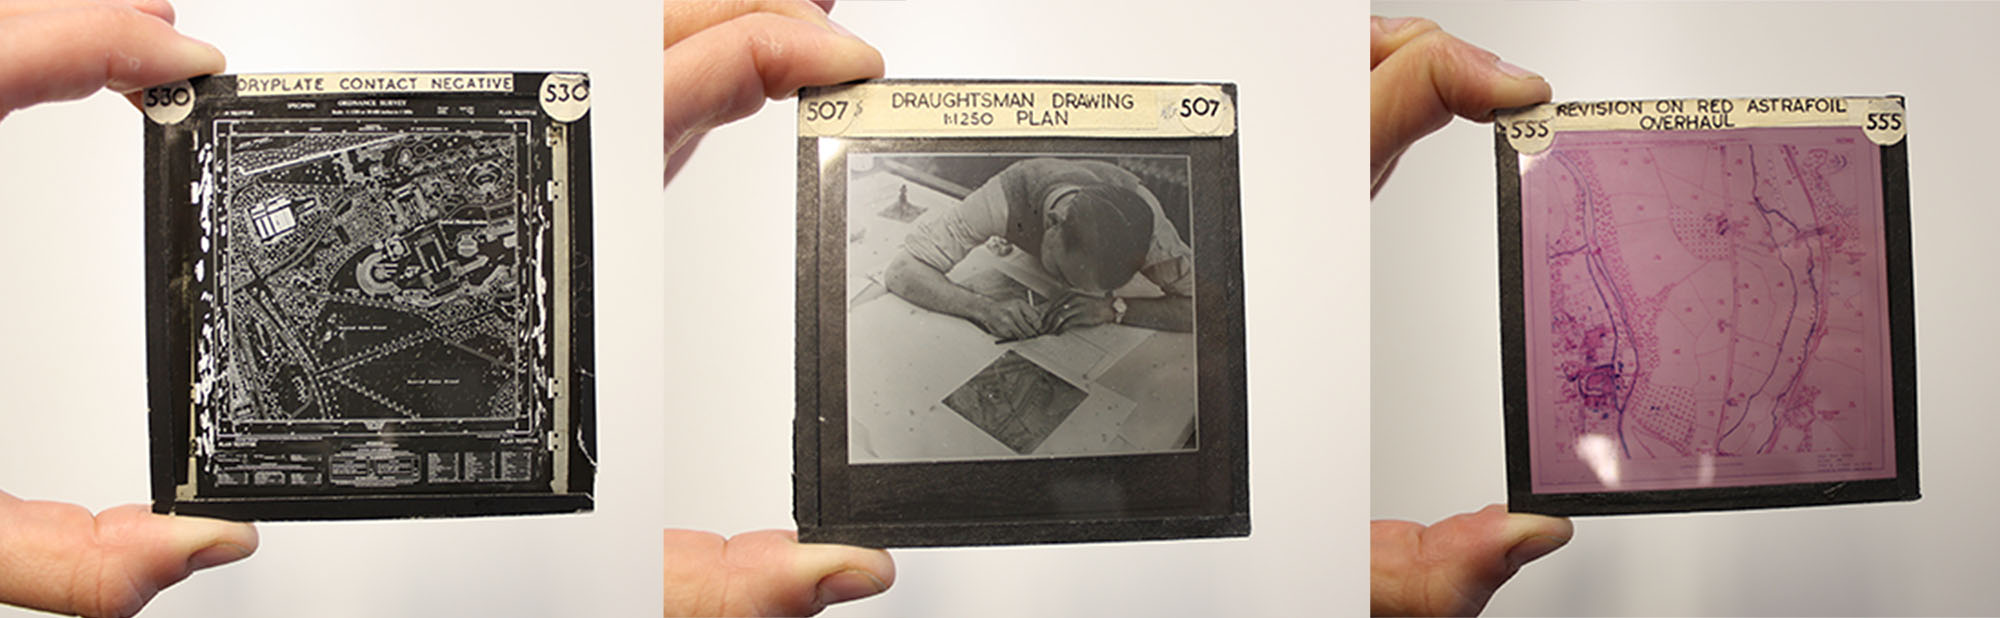 Composite image of three lantern slides being held up; one depicts an aerial photograph, another a person writing 